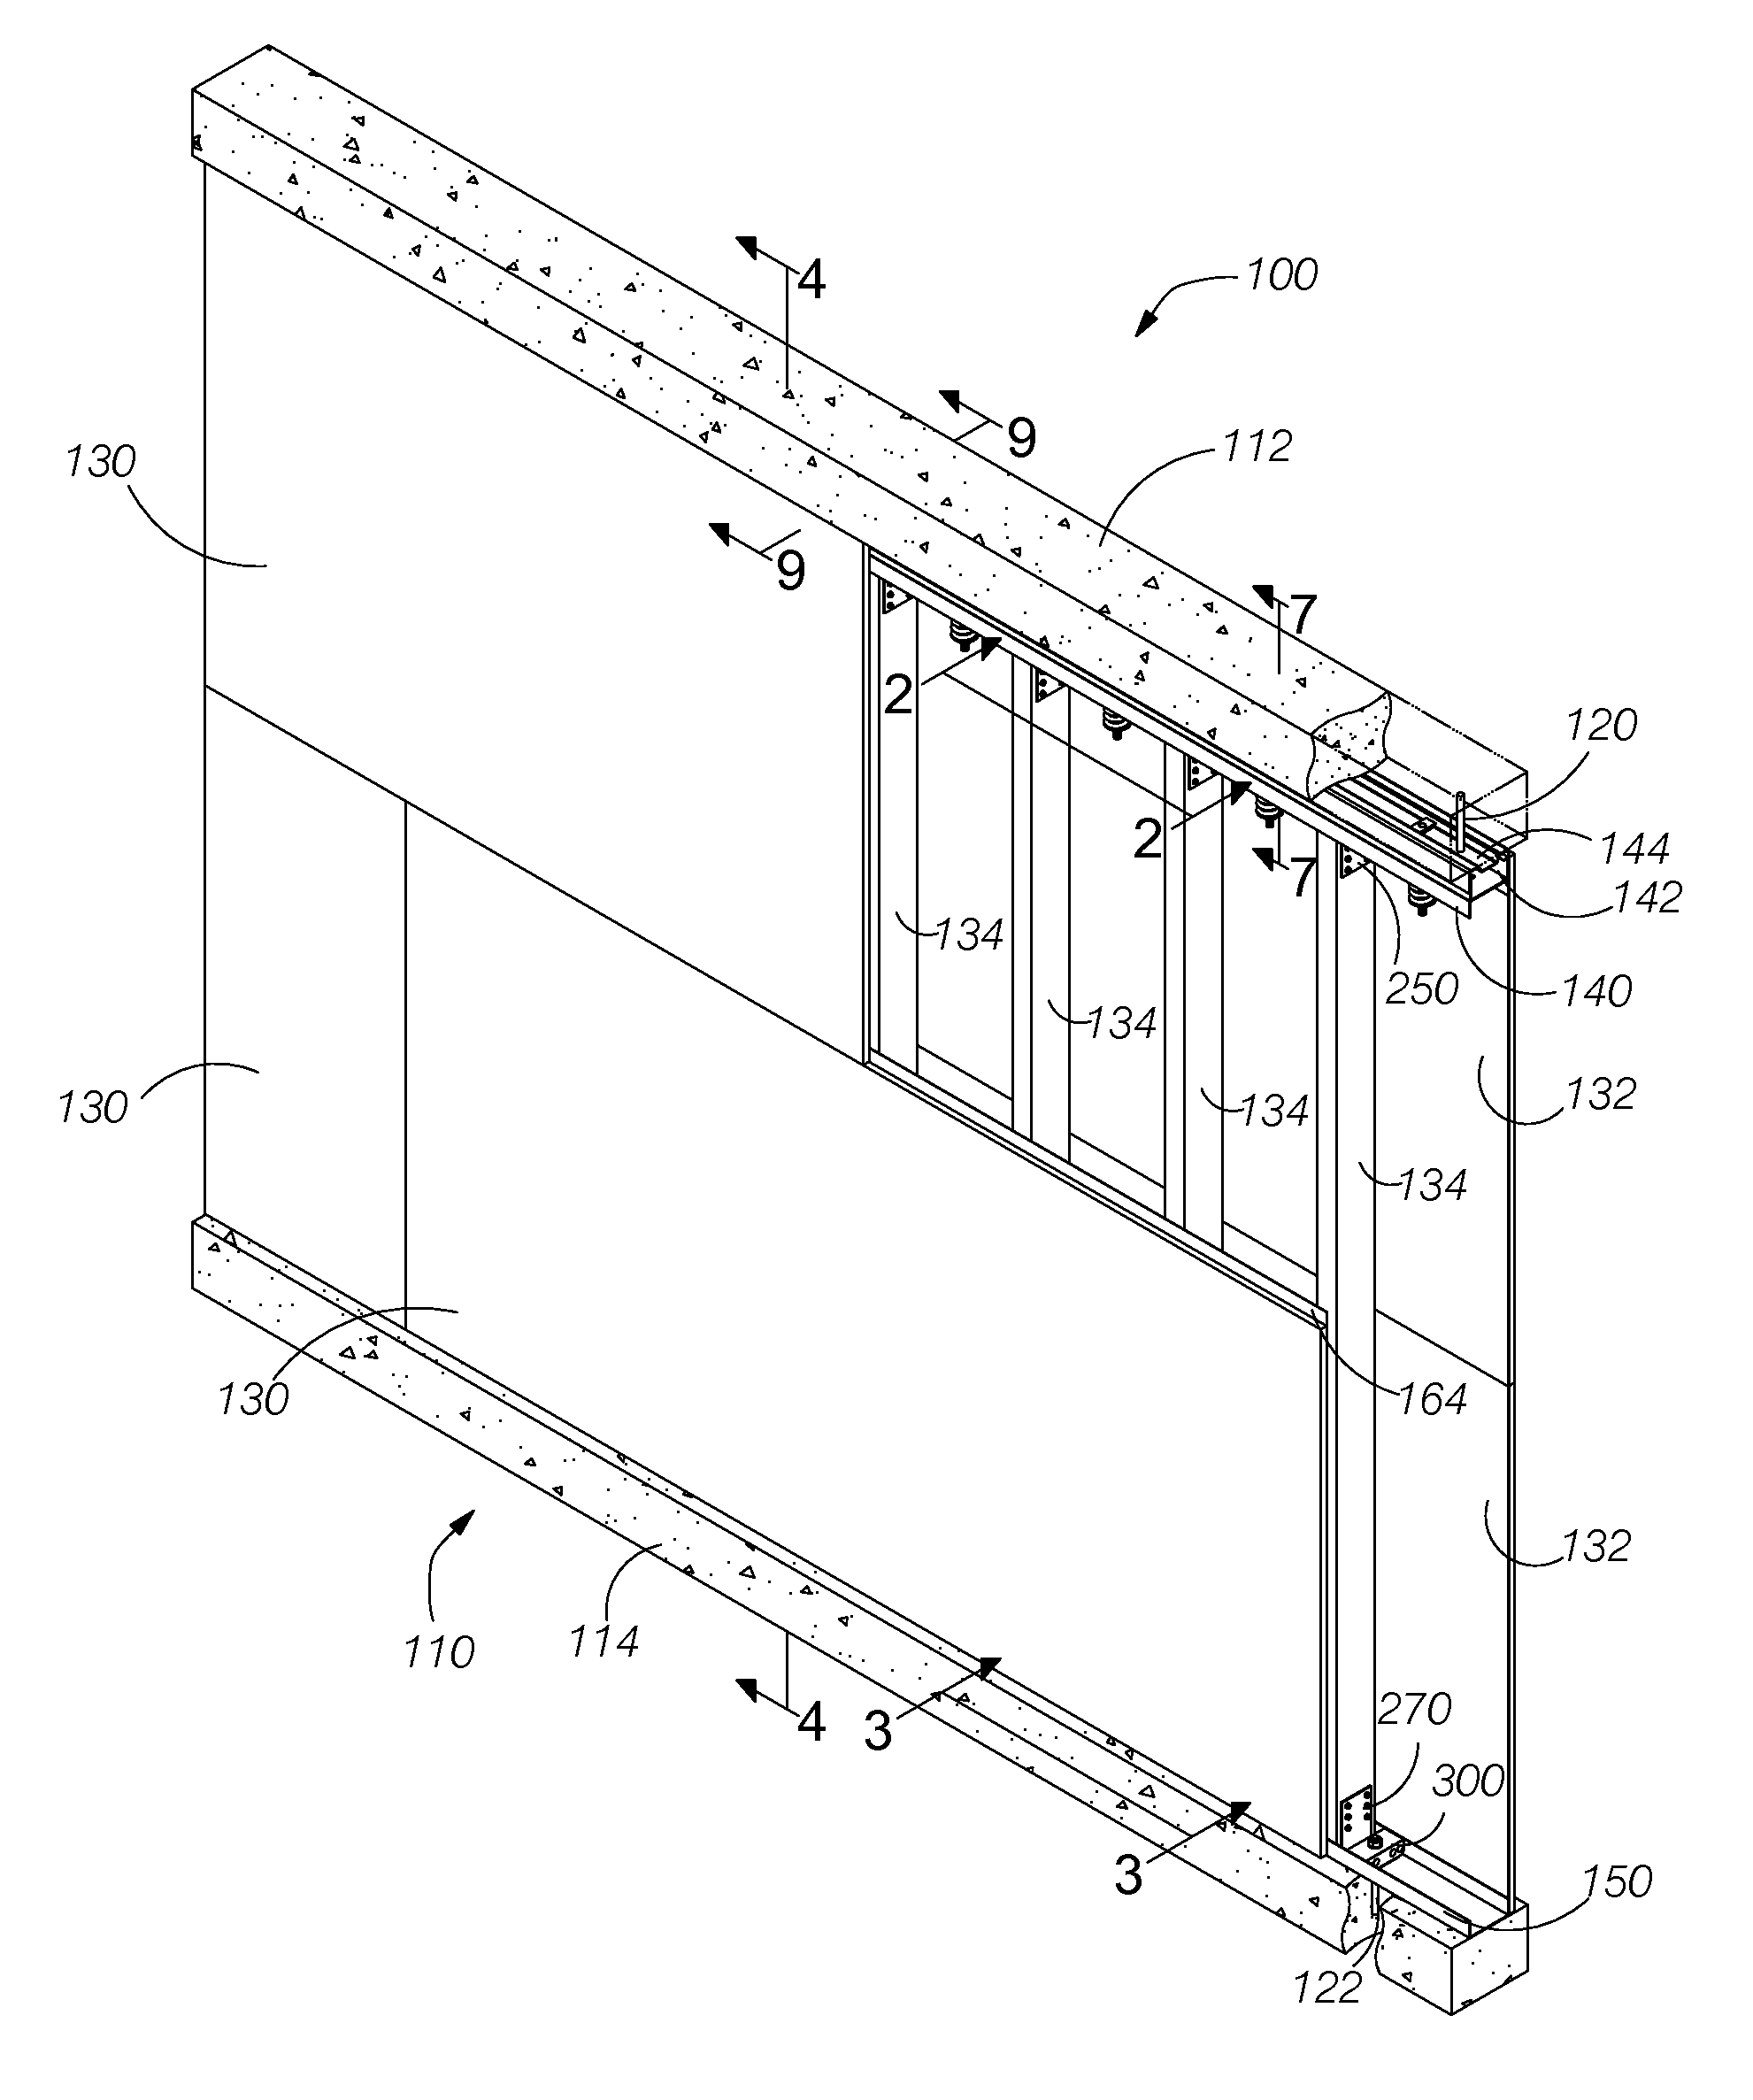 Energy absorbing blast wall for building structure